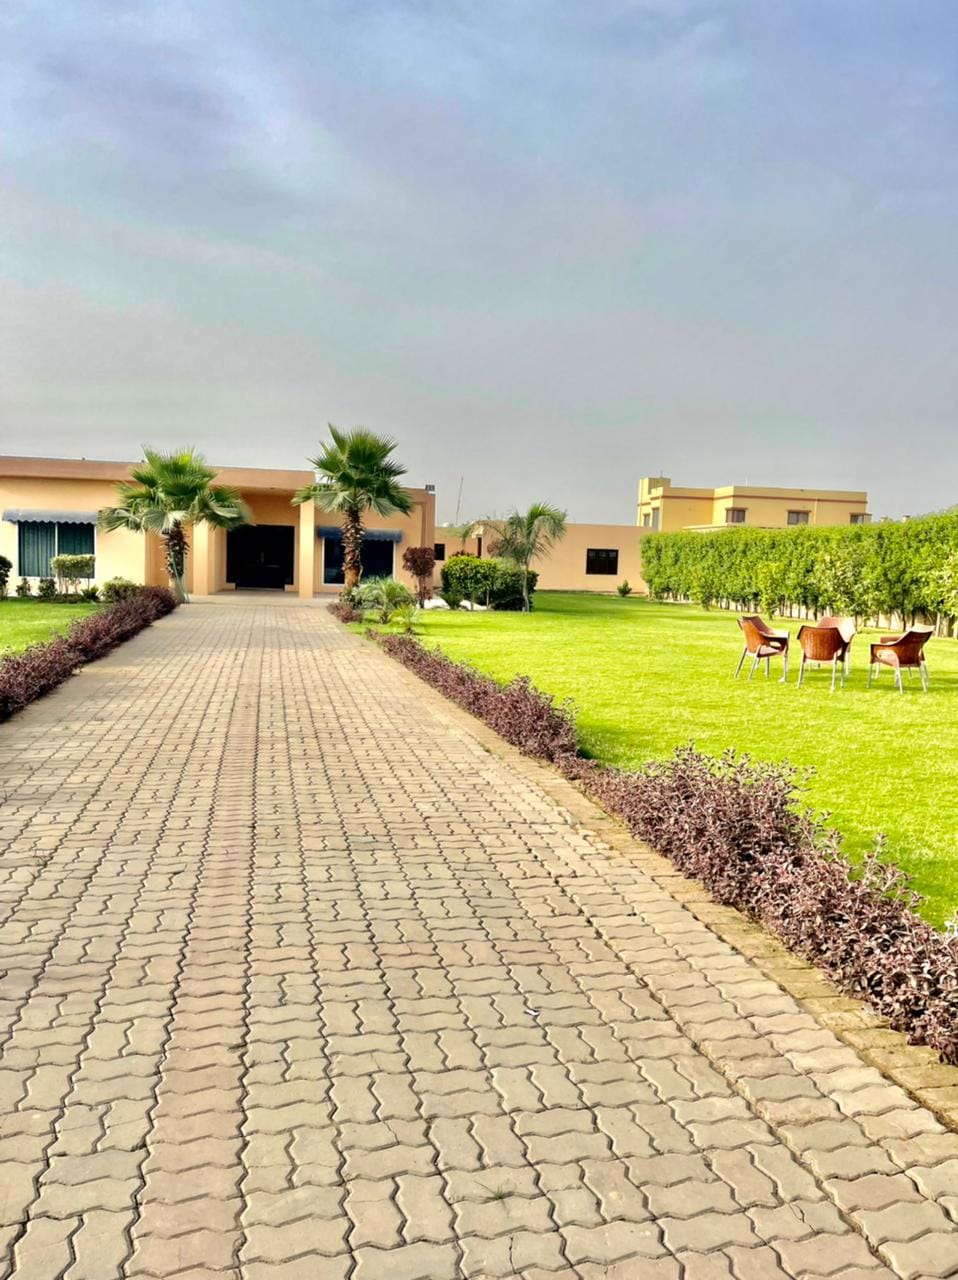 1 Kanal Farm House For Sale DHA Phase 6 Lahore